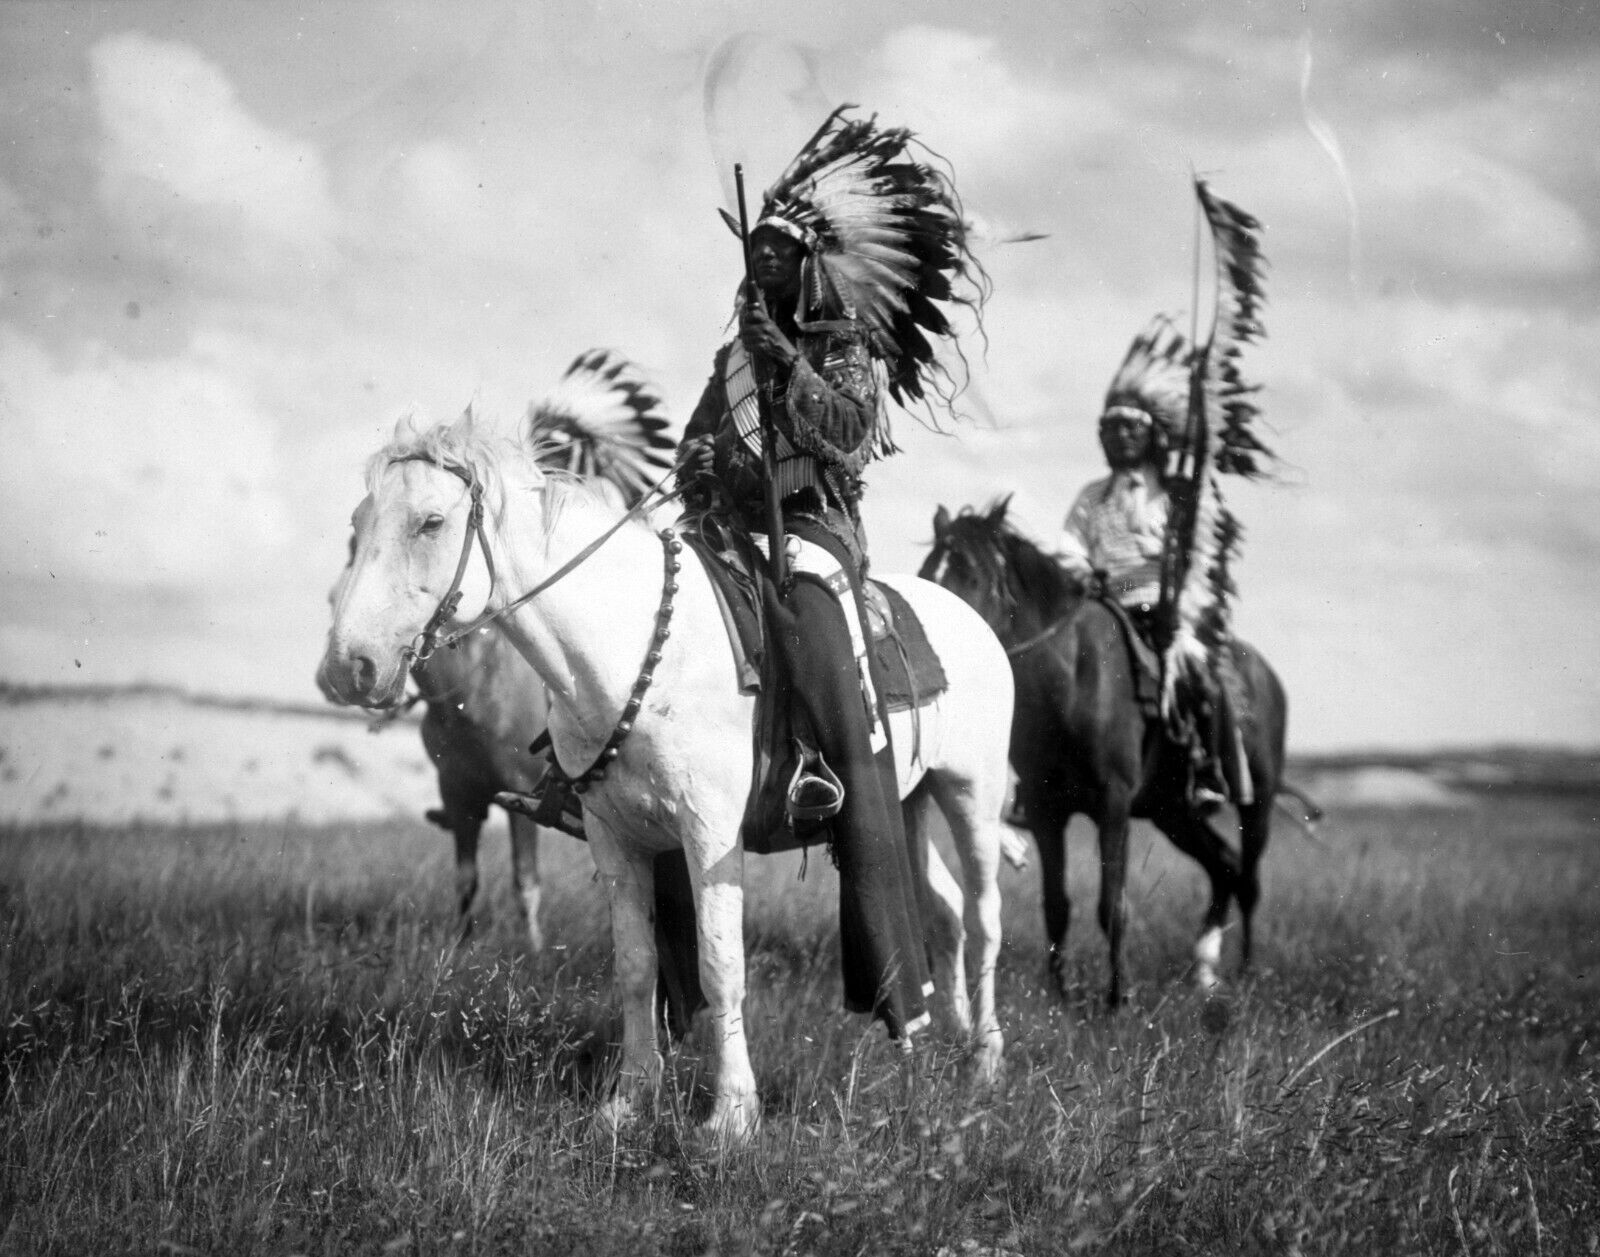 New 8 x 10 Photo of Sioux Chiefs on Horseback - Black & White